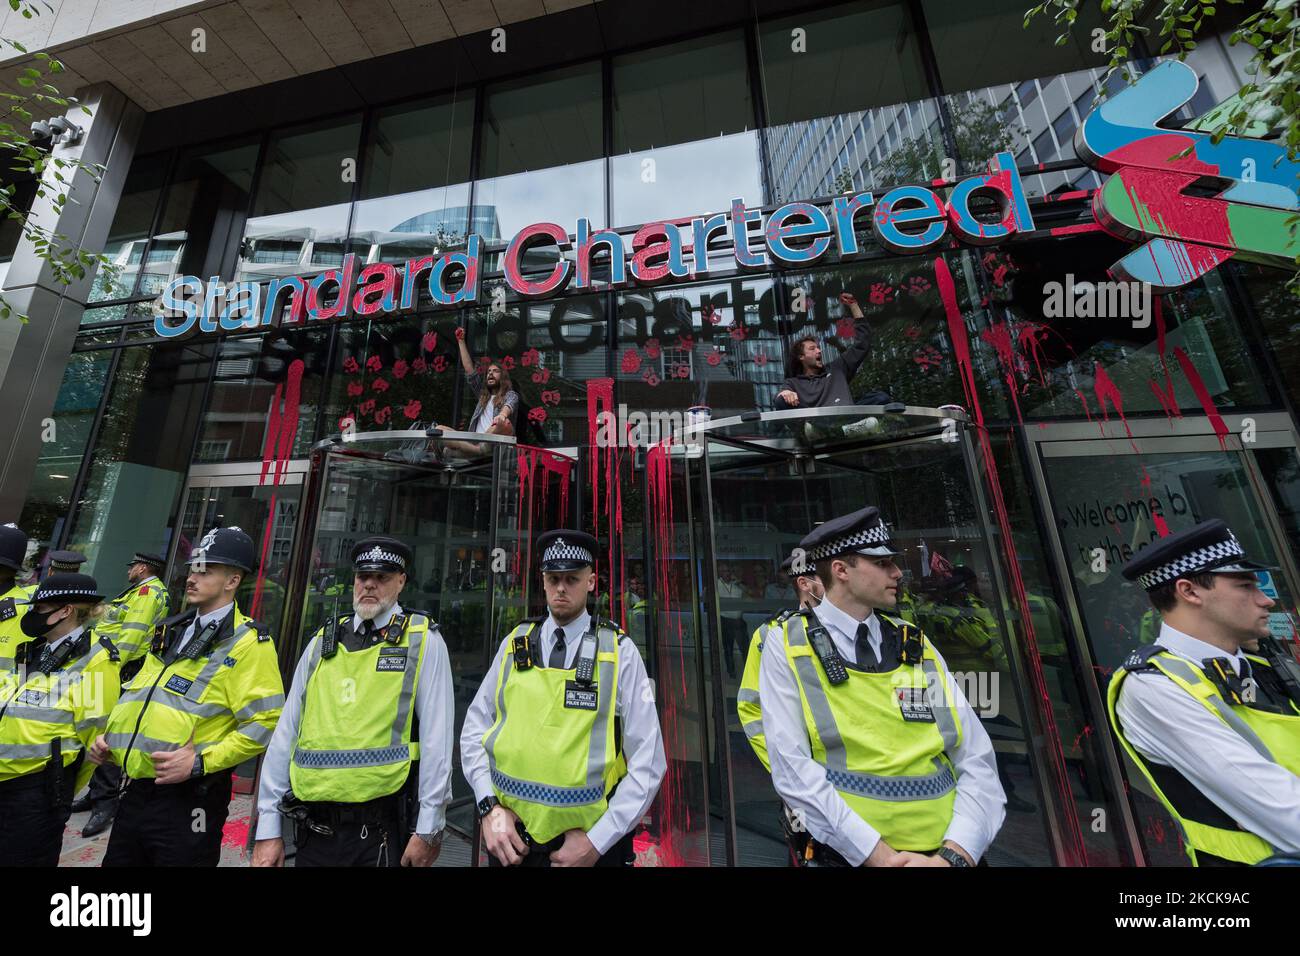 LONDON, UNITED KINGDOM - AUGUST 27, 2021: Environmental activists from Extinction Rebellion sit on top of the entrance to the Standard Chartered which has red paint spilled over the windows during a protest against the companies and institutions that are financing, insuring and enabling major fossil fuel projects and extraction of resources in the developing countries of the Global South, demanding change to the colonial system that drives the crises of climate and racism on 27 August 2021 in London, England. Extinction Rebellion activists target the City of London during the two week 'Impossi Stock Photo